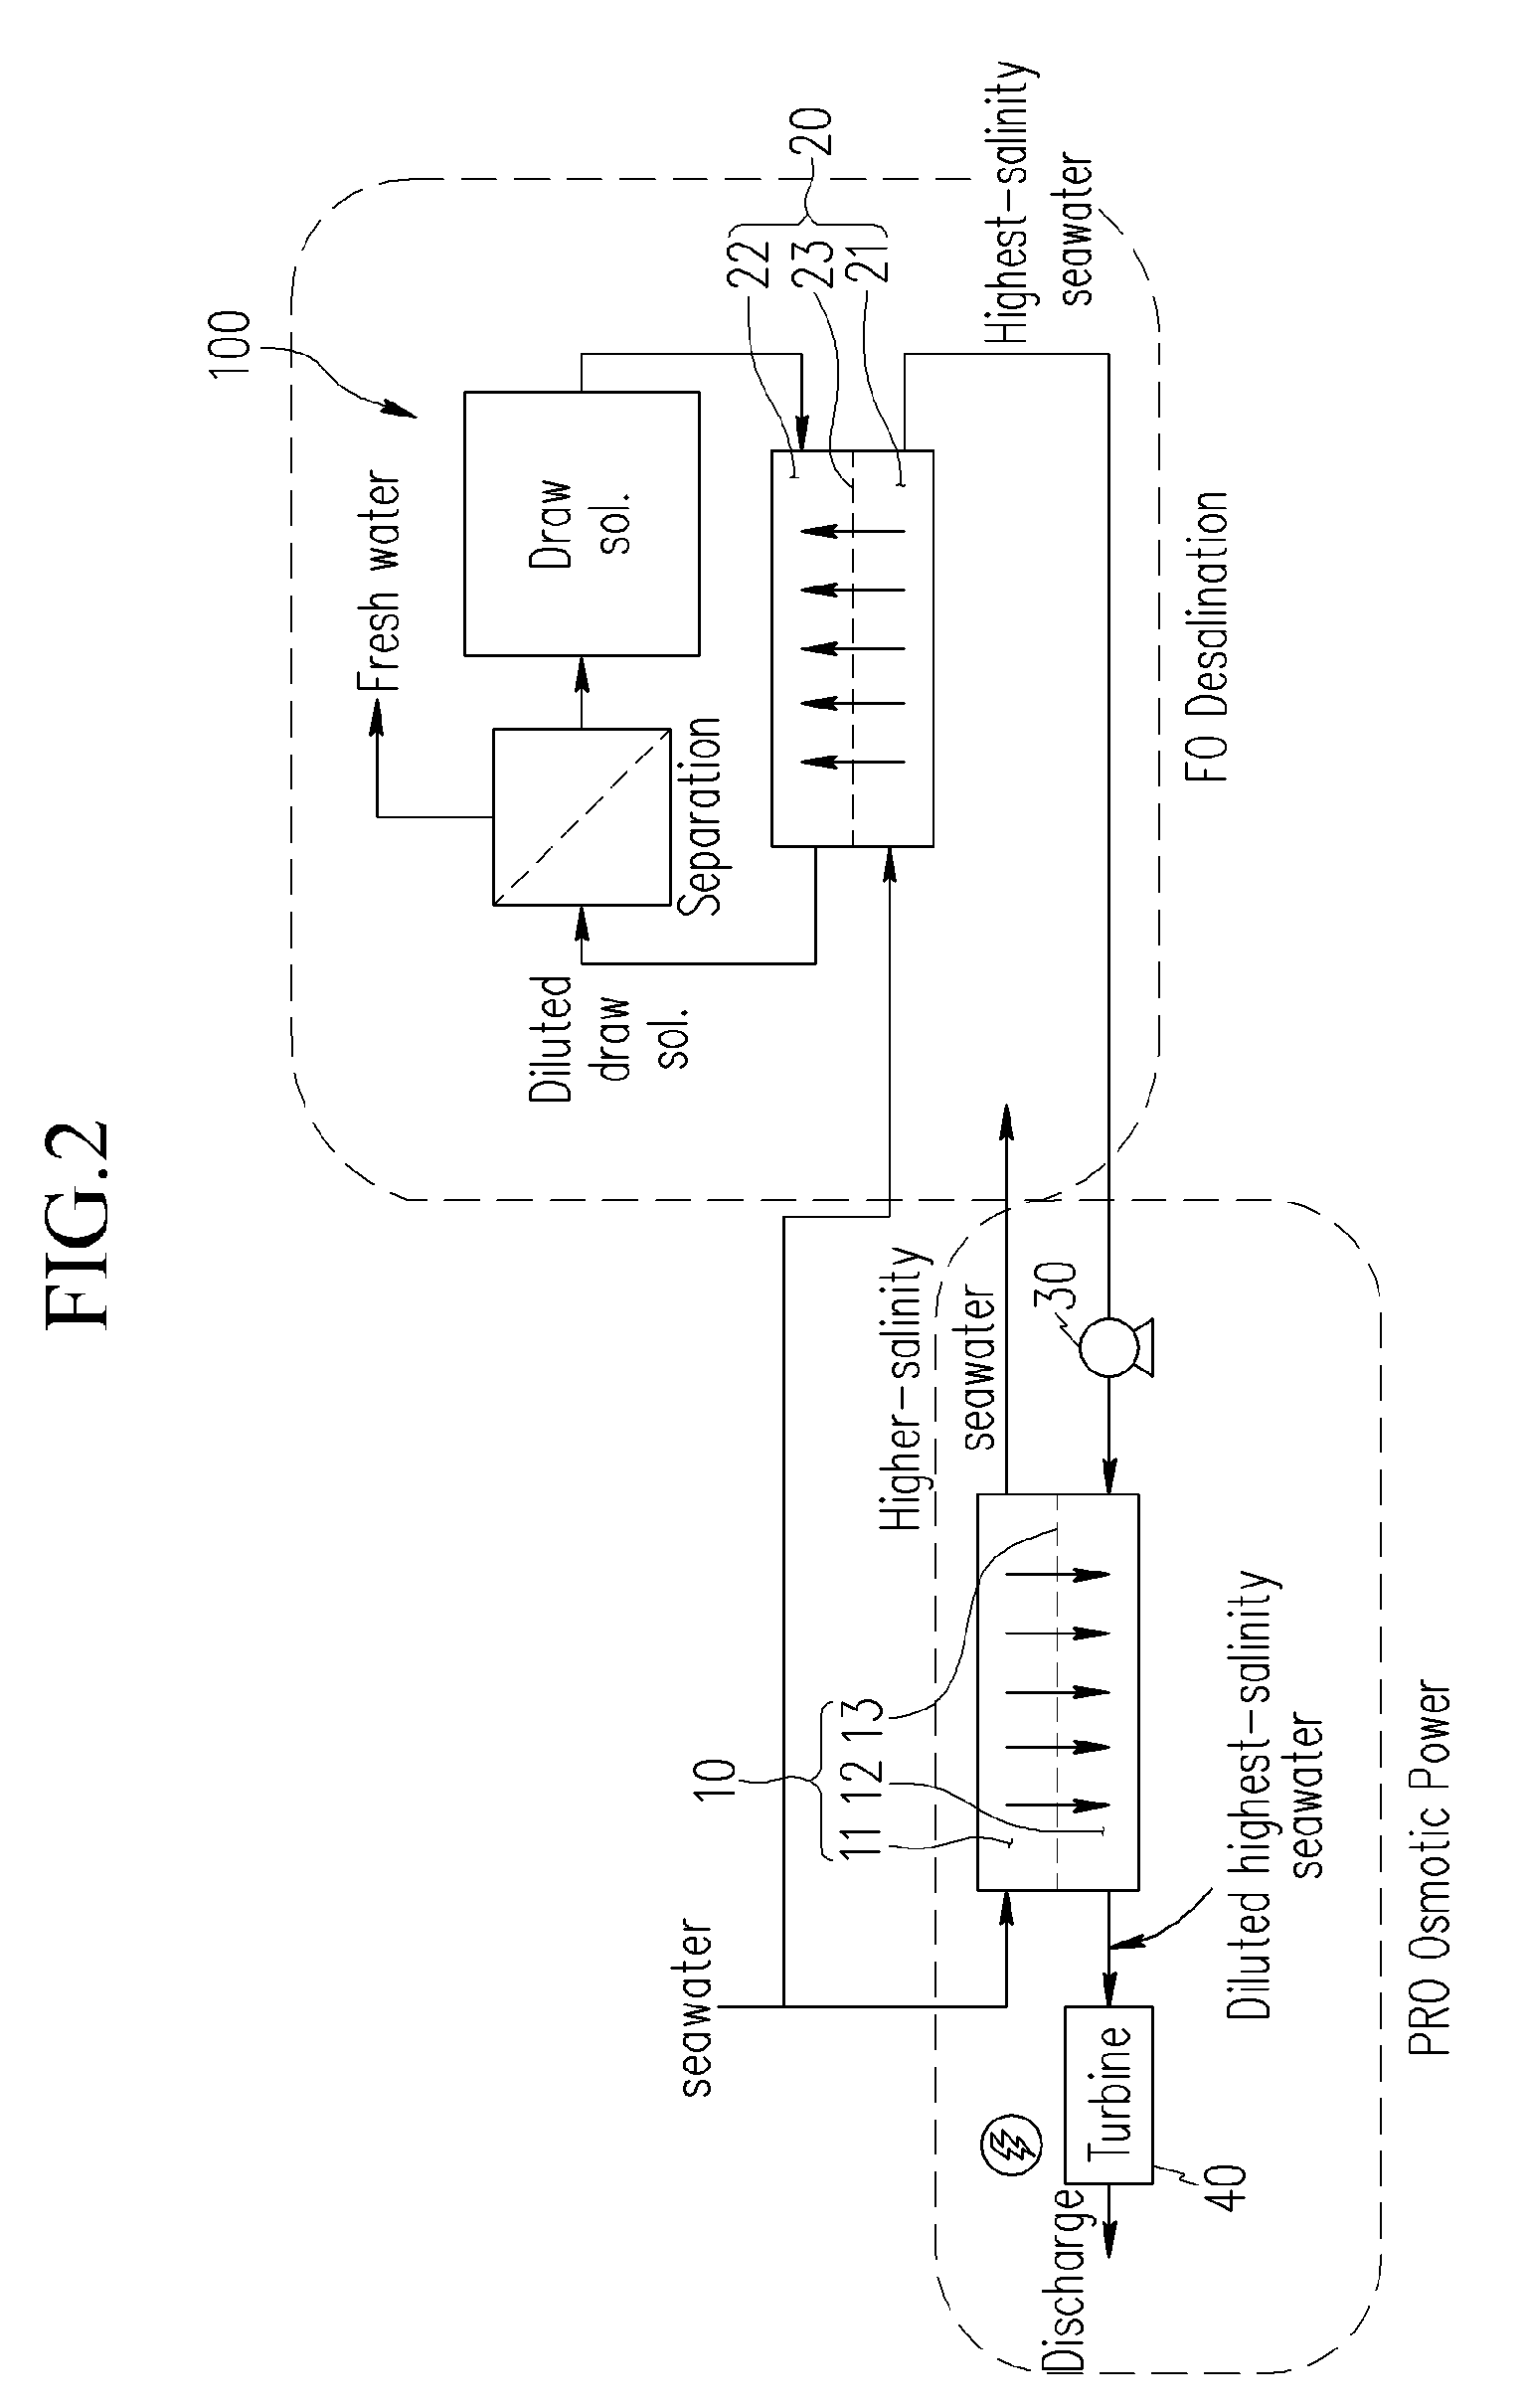 Apparatus for osmotic power generation and desalination using salinity difference